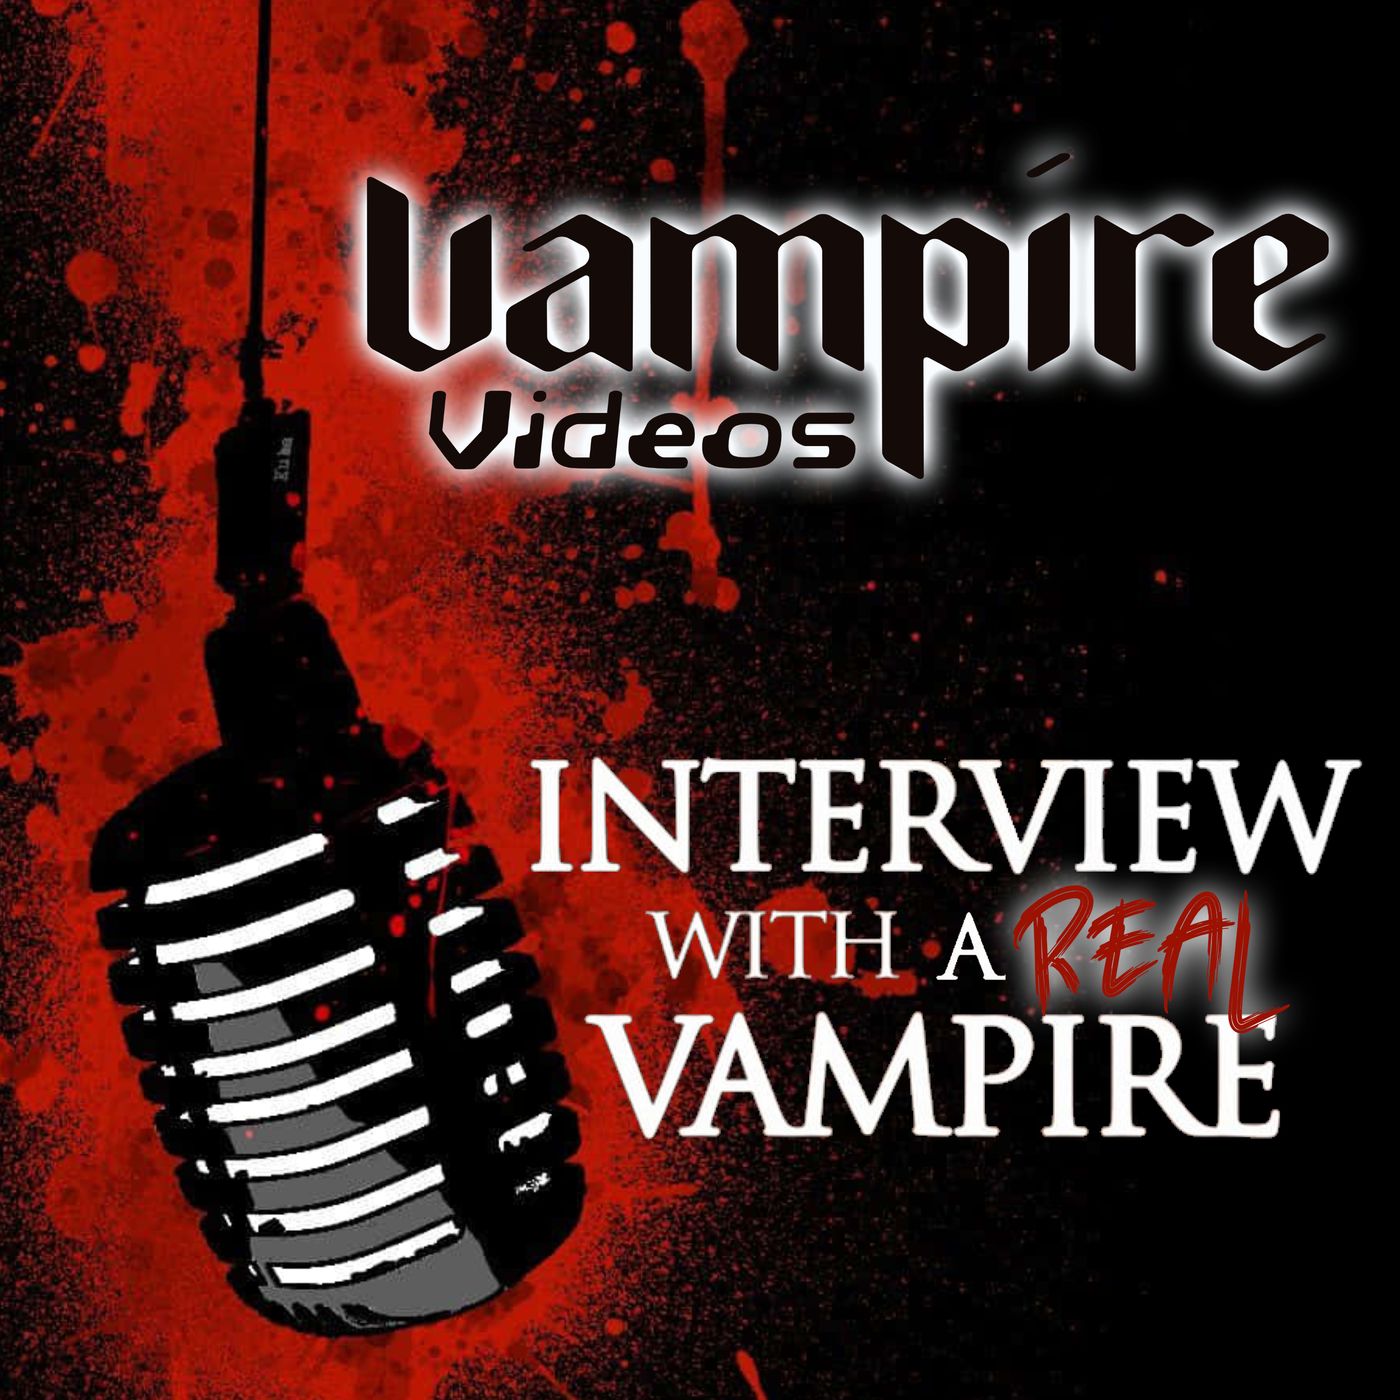 Bonus: Interview with a REAL Vampire